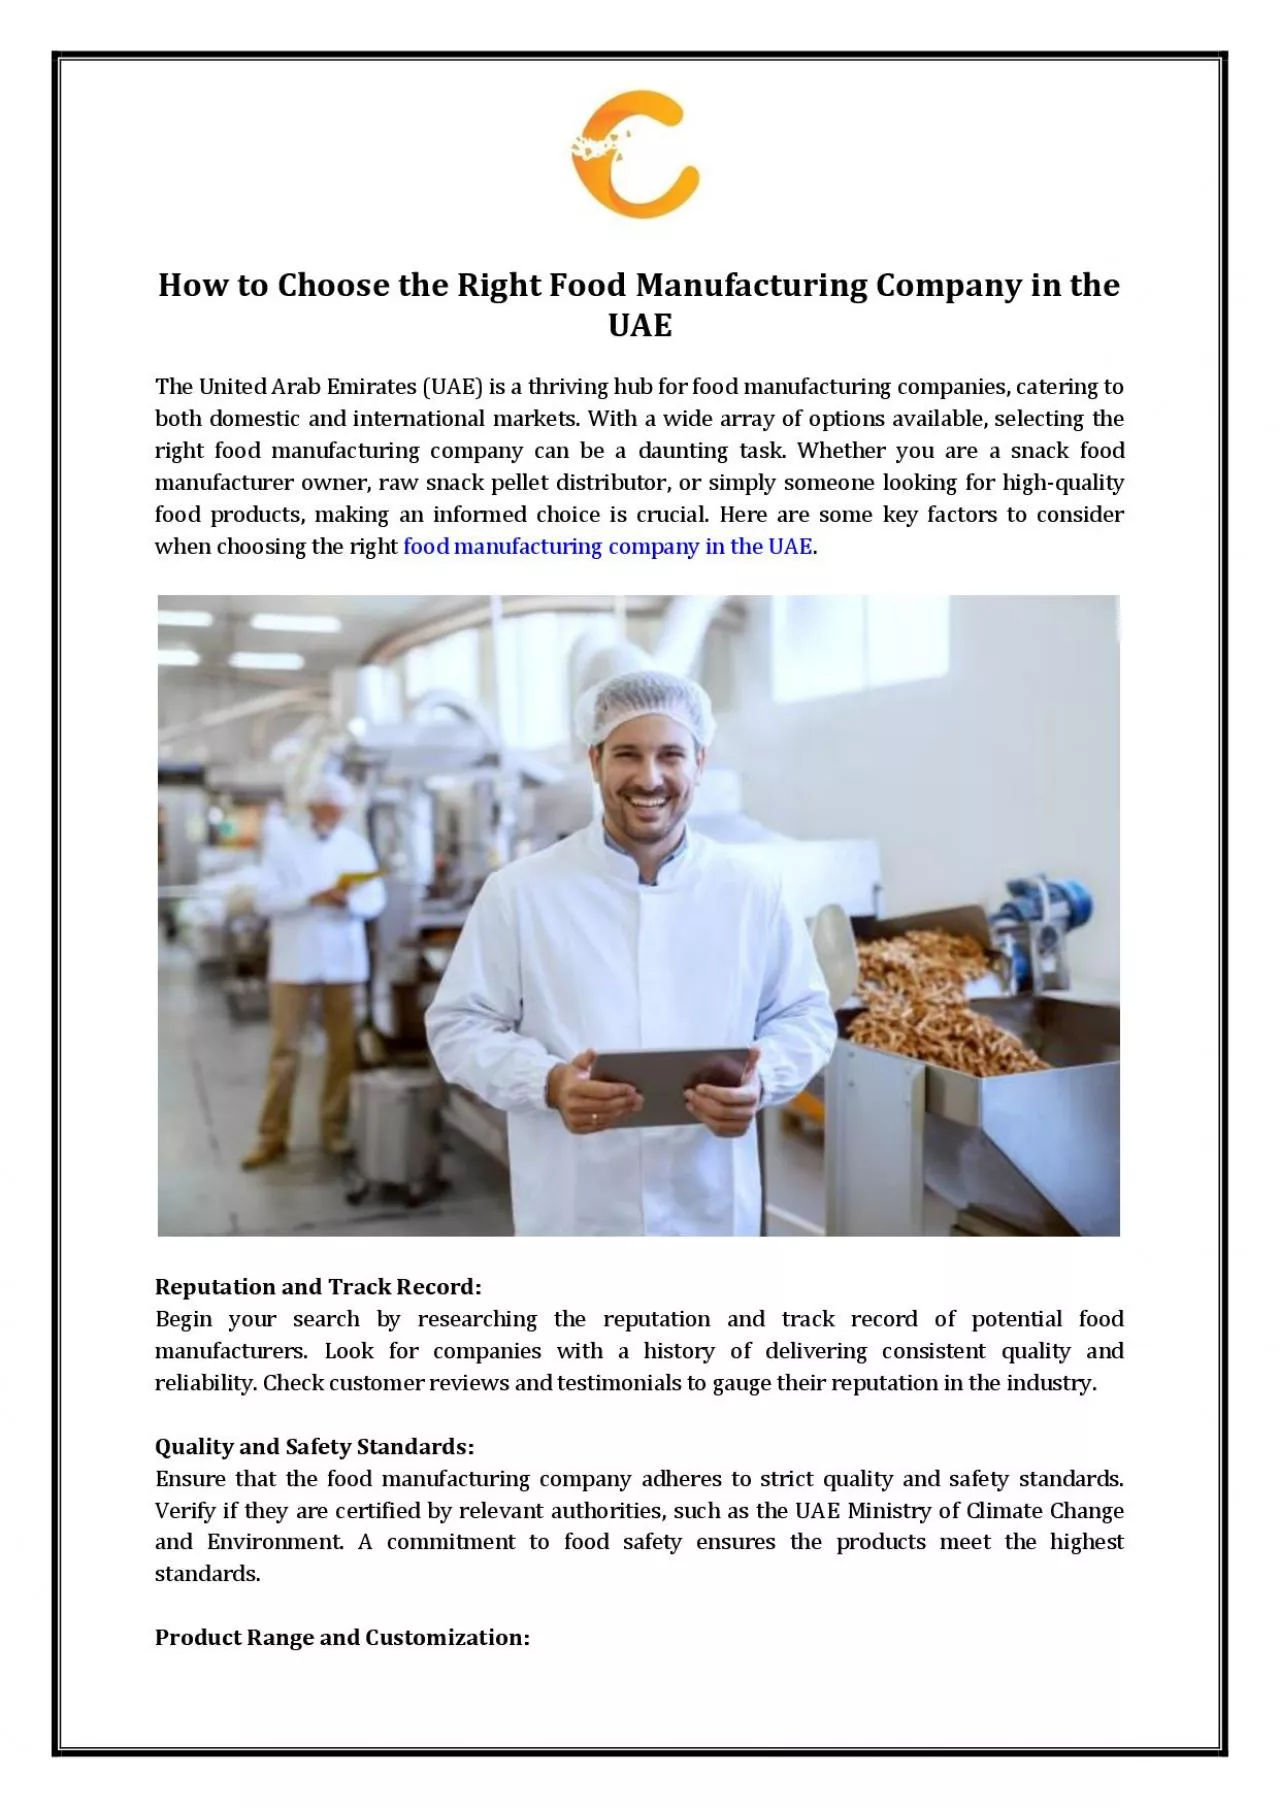 How to Choose the Right Food Manufacturing Company in the UAE